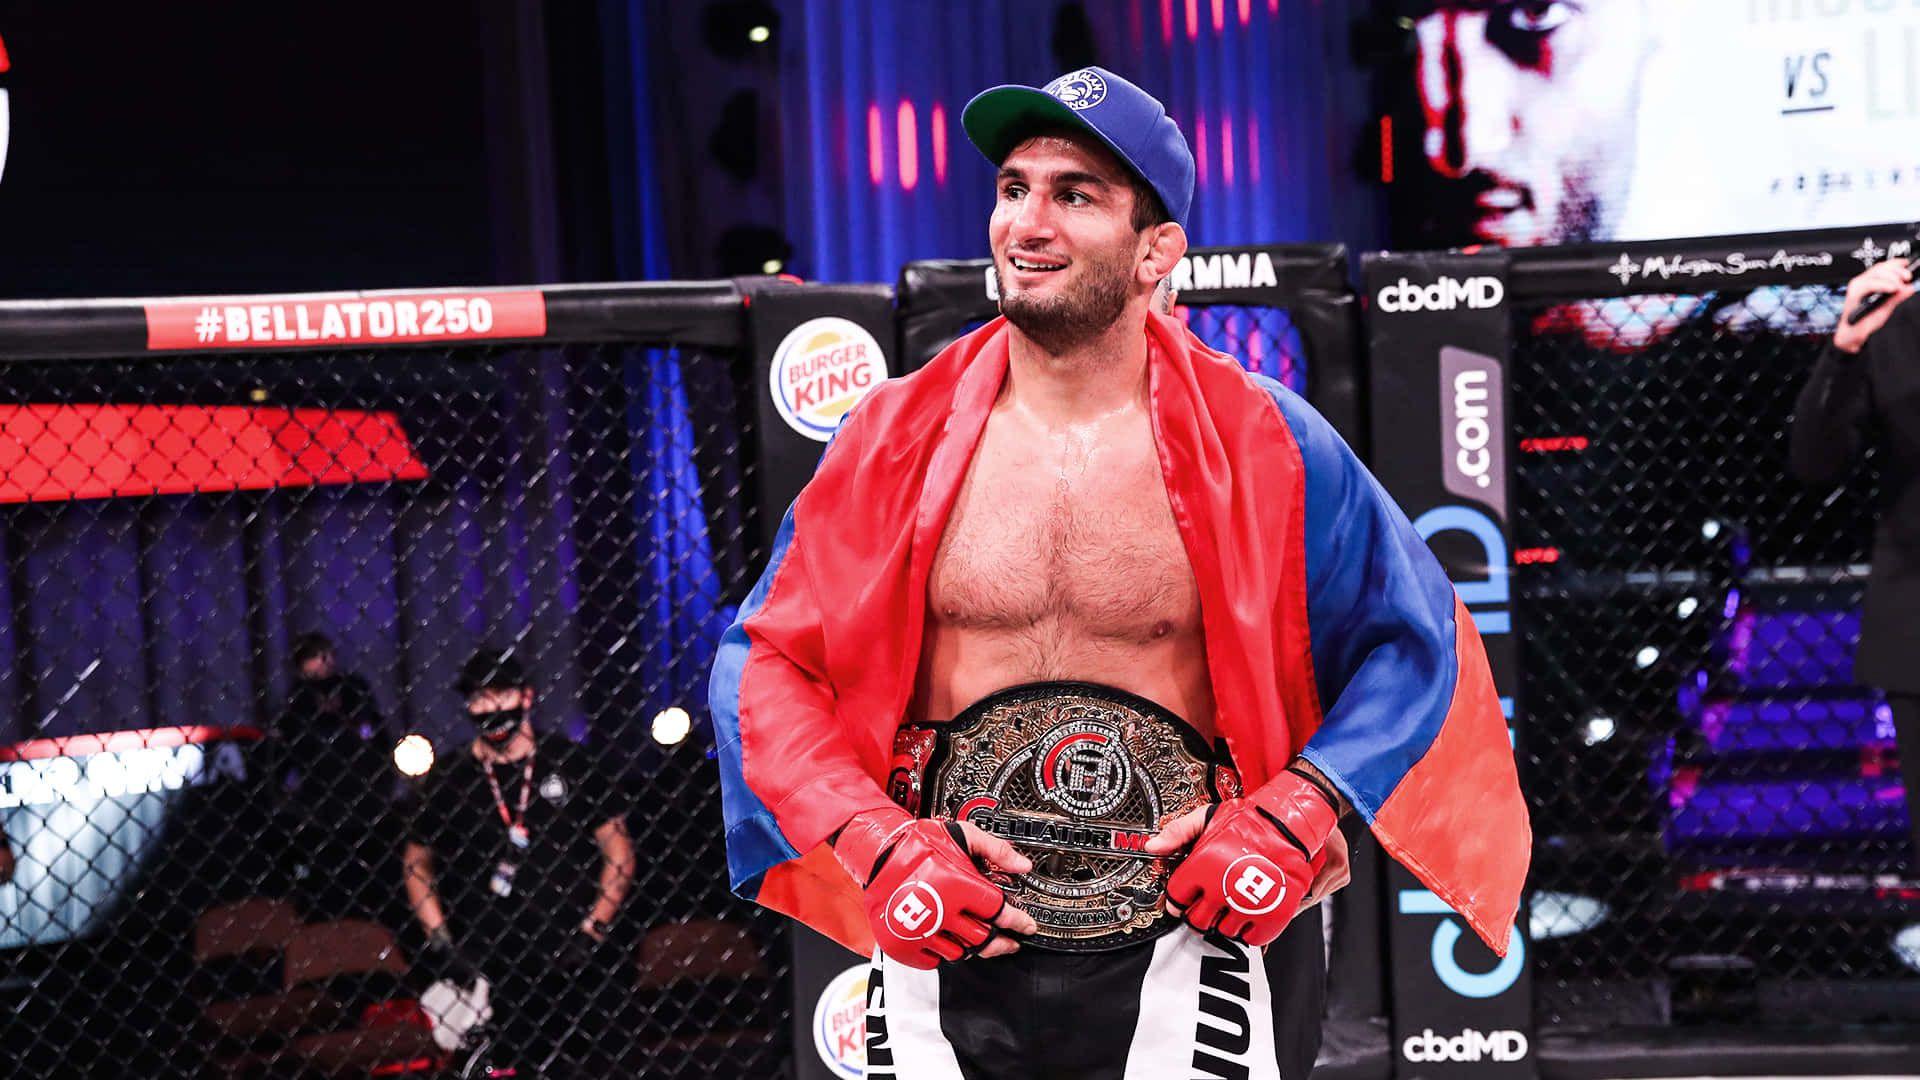 Gegard Mousasi with the Bellator Middleweight Title. Credit: Wallpapers.com